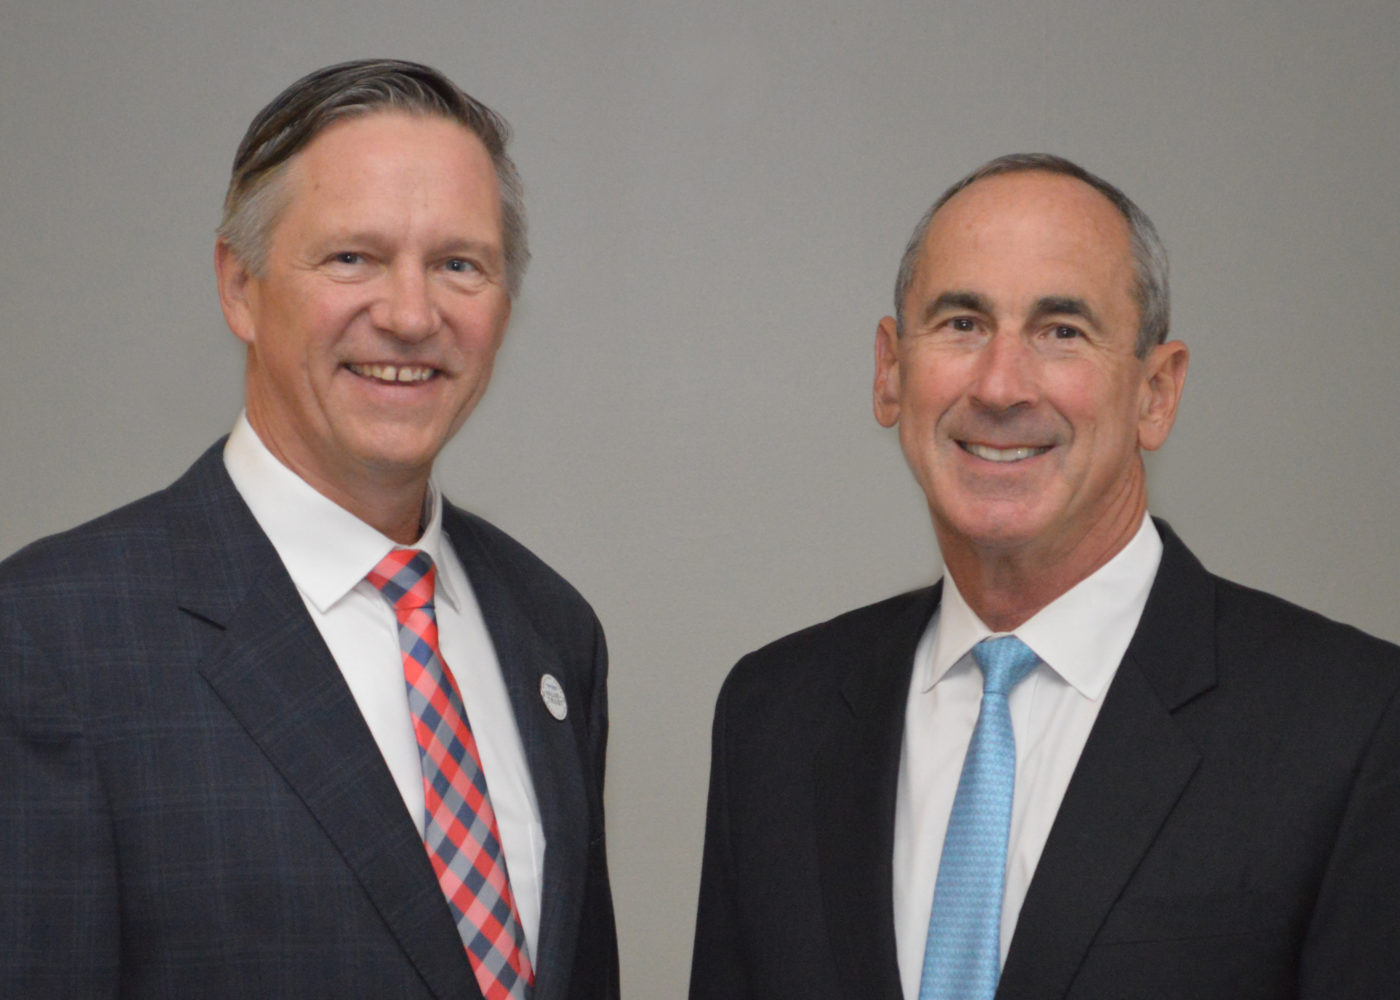 David Davenport (left) and Ray Johns (right) will lead FlightSafety International as co-CEOs. FlightSafety Photo